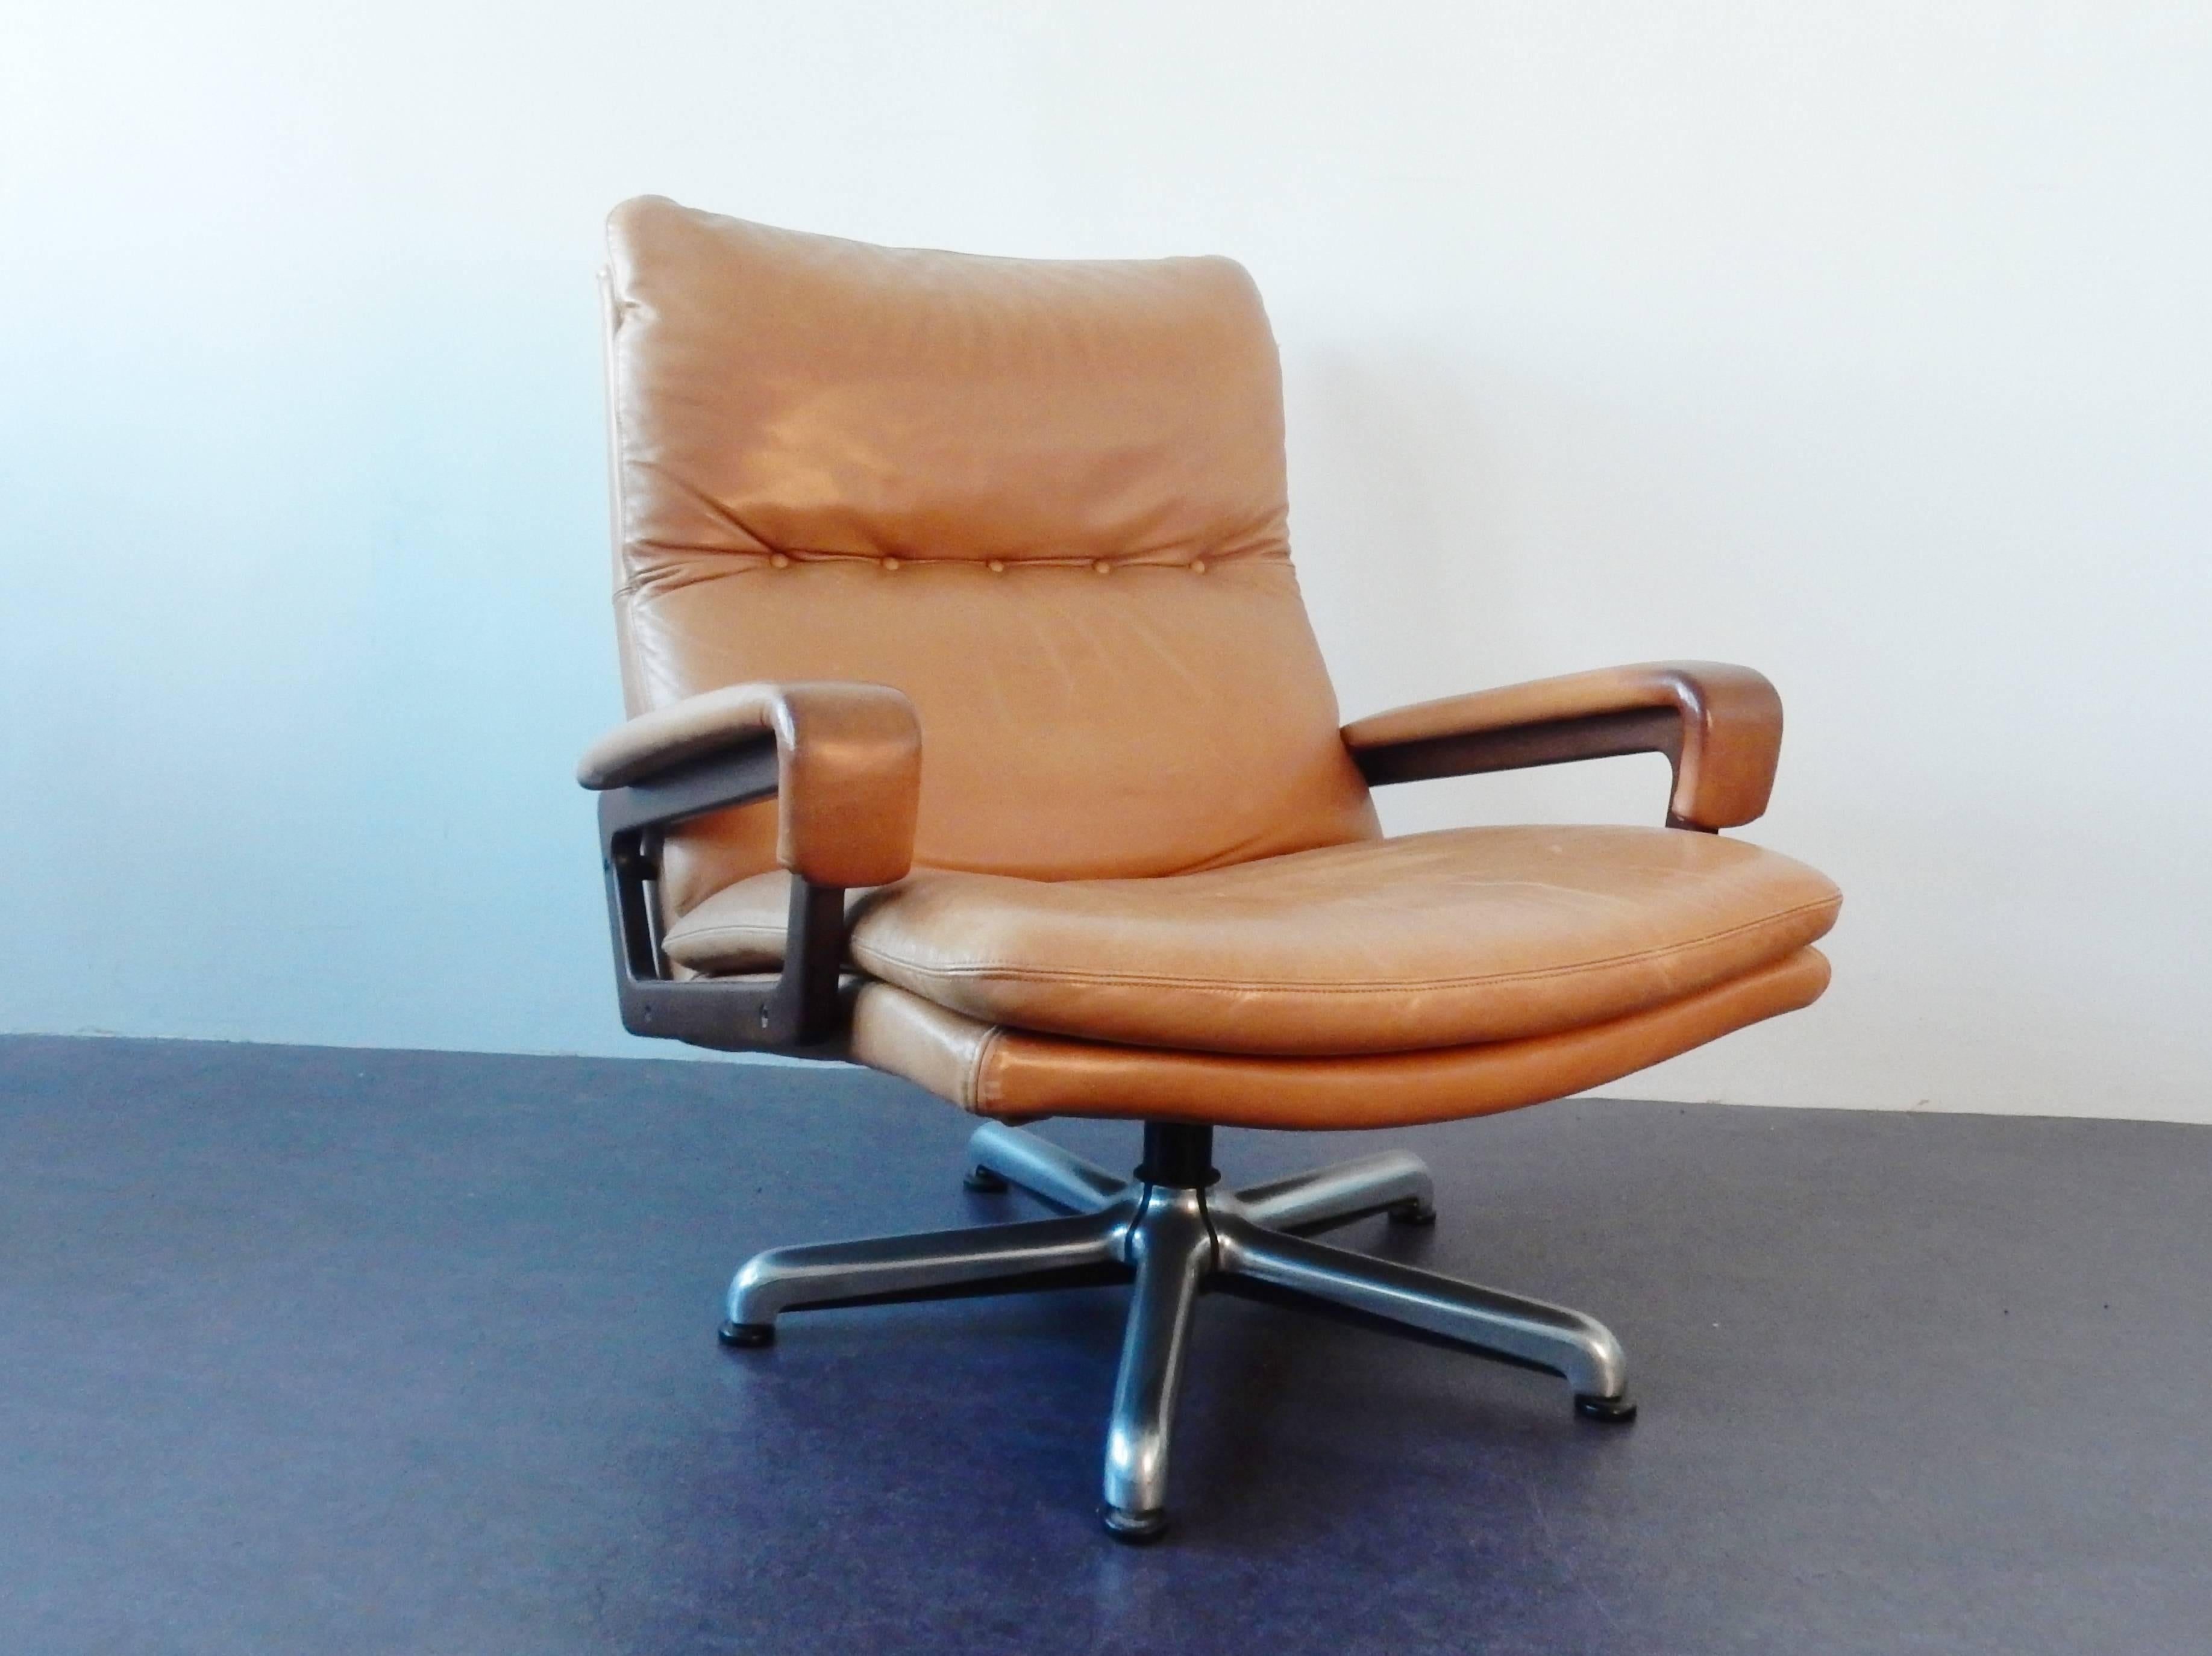 This cognac leather 'King' model lounge chair was made by Strässle and designed by André Vandenbeuck. The armchair has wooden armrests and stands on a metal swivel base. The leather does show some wear from age and use, but all is in a solid and